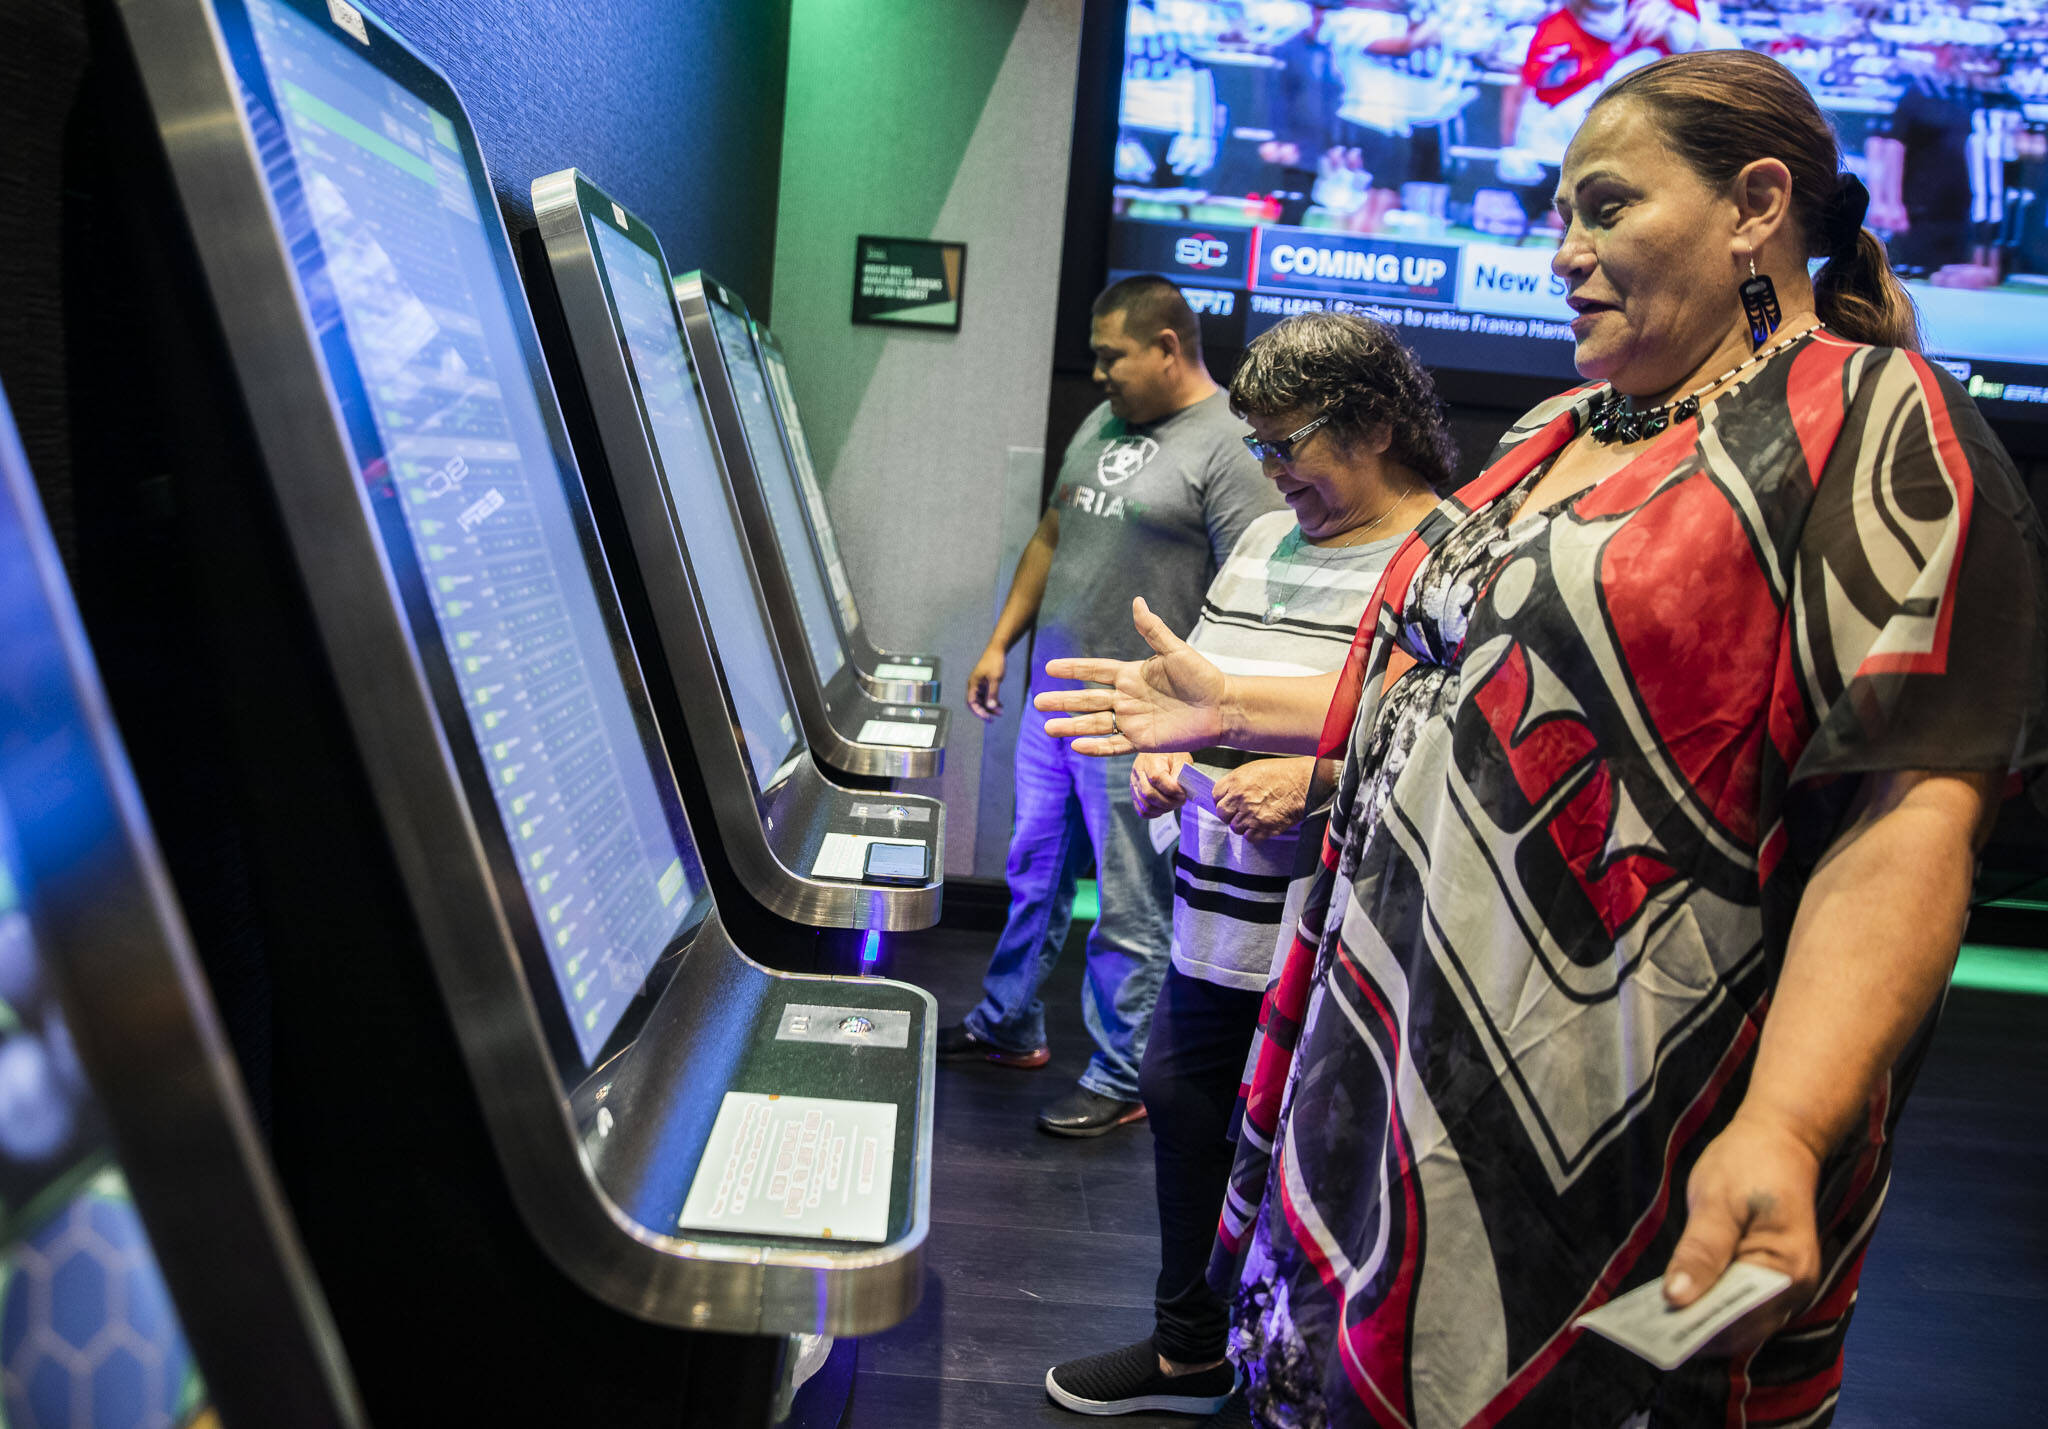 Tulalip Chairwoman Teri Gobin reacts after placing one of the first bets during the soft opening of the DraftKings Sportsbook at the Tulalip Casino on Tuesday, in Tulalip. (Olivia Vanni / The Herald)